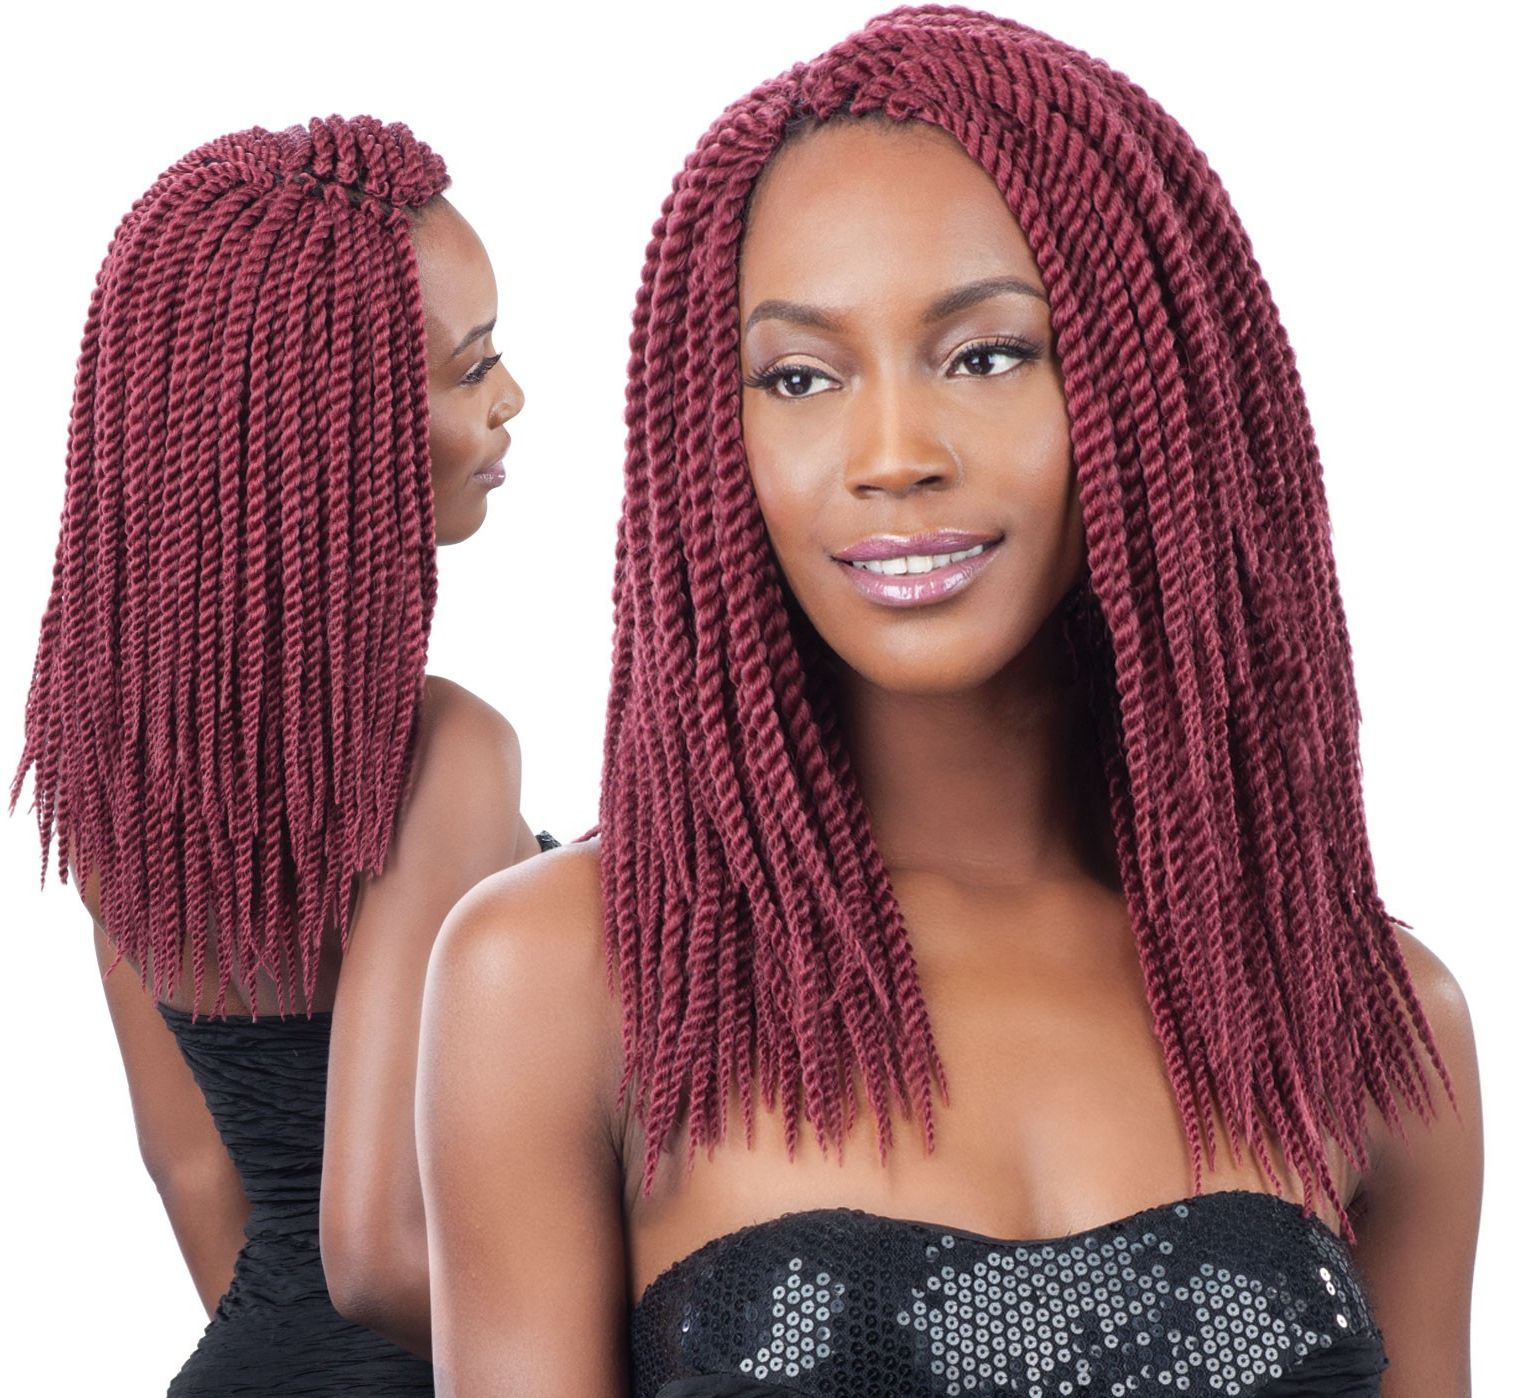 Well Known Black And Brown Senegalese Twist Hairstyles In Model Model Glance Crochet Braid Senegalese Twist Large 12 Inch (View 12 of 20)